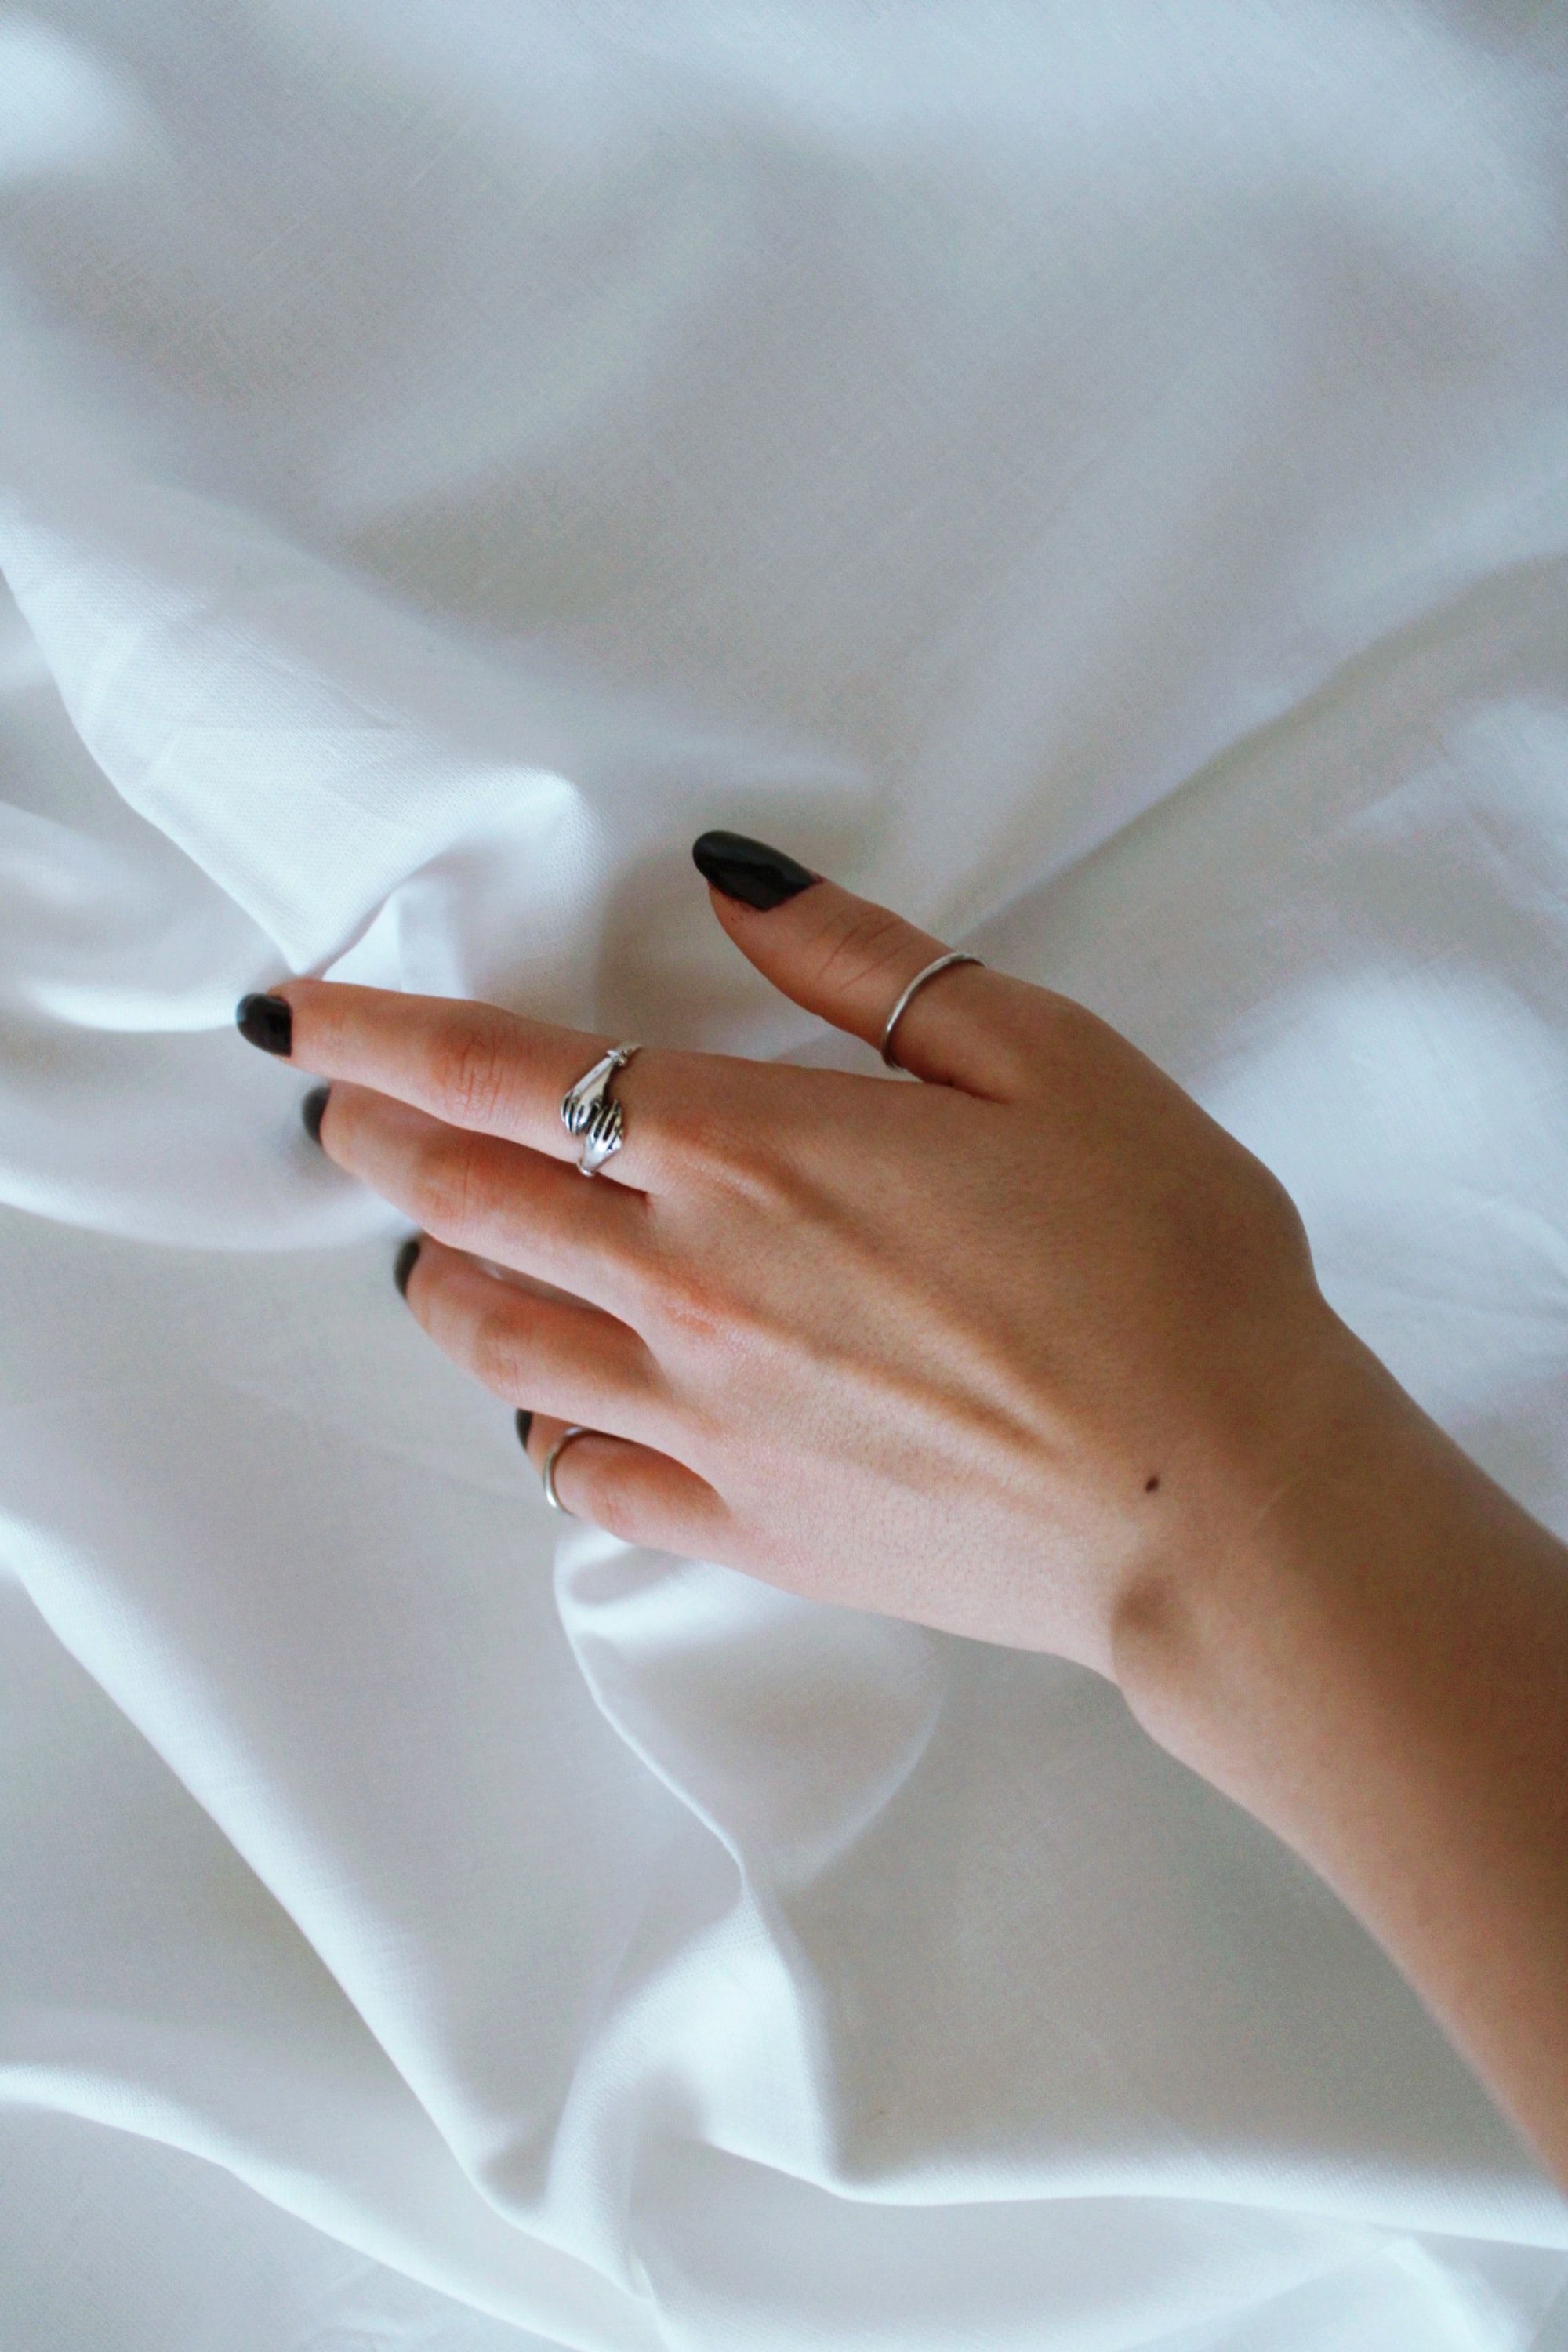 A woman is touching her ring finger - Nails